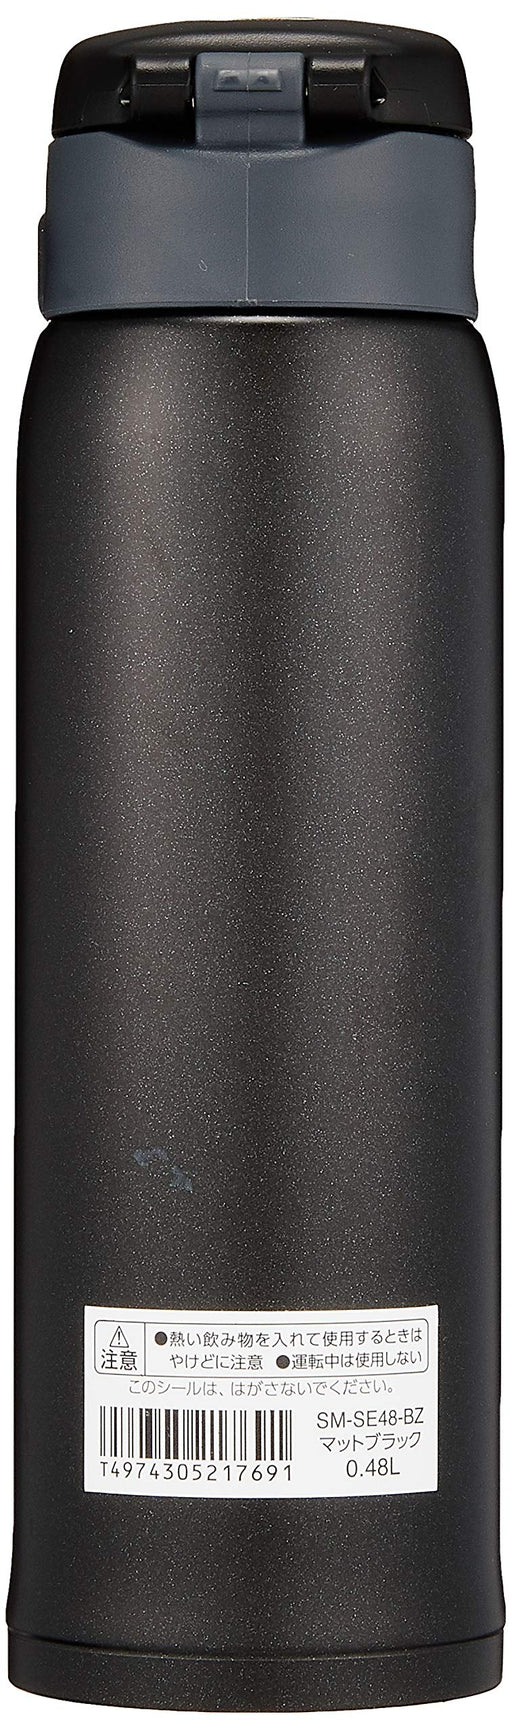 https://cdn.shopify.com/s/files/1/0512/5429/6766/products/Zojirushi-Water-Bottle-Stainless-Steel-Mug-Bottle-Direct-Drinking-Lightweight-Cold-Insulation-One-Touch-Open-Type-480Ml-Matte-Black-SmSe48Bz-Japan-Figure-4974305217691-1_512x1732.jpg?v=1690909817